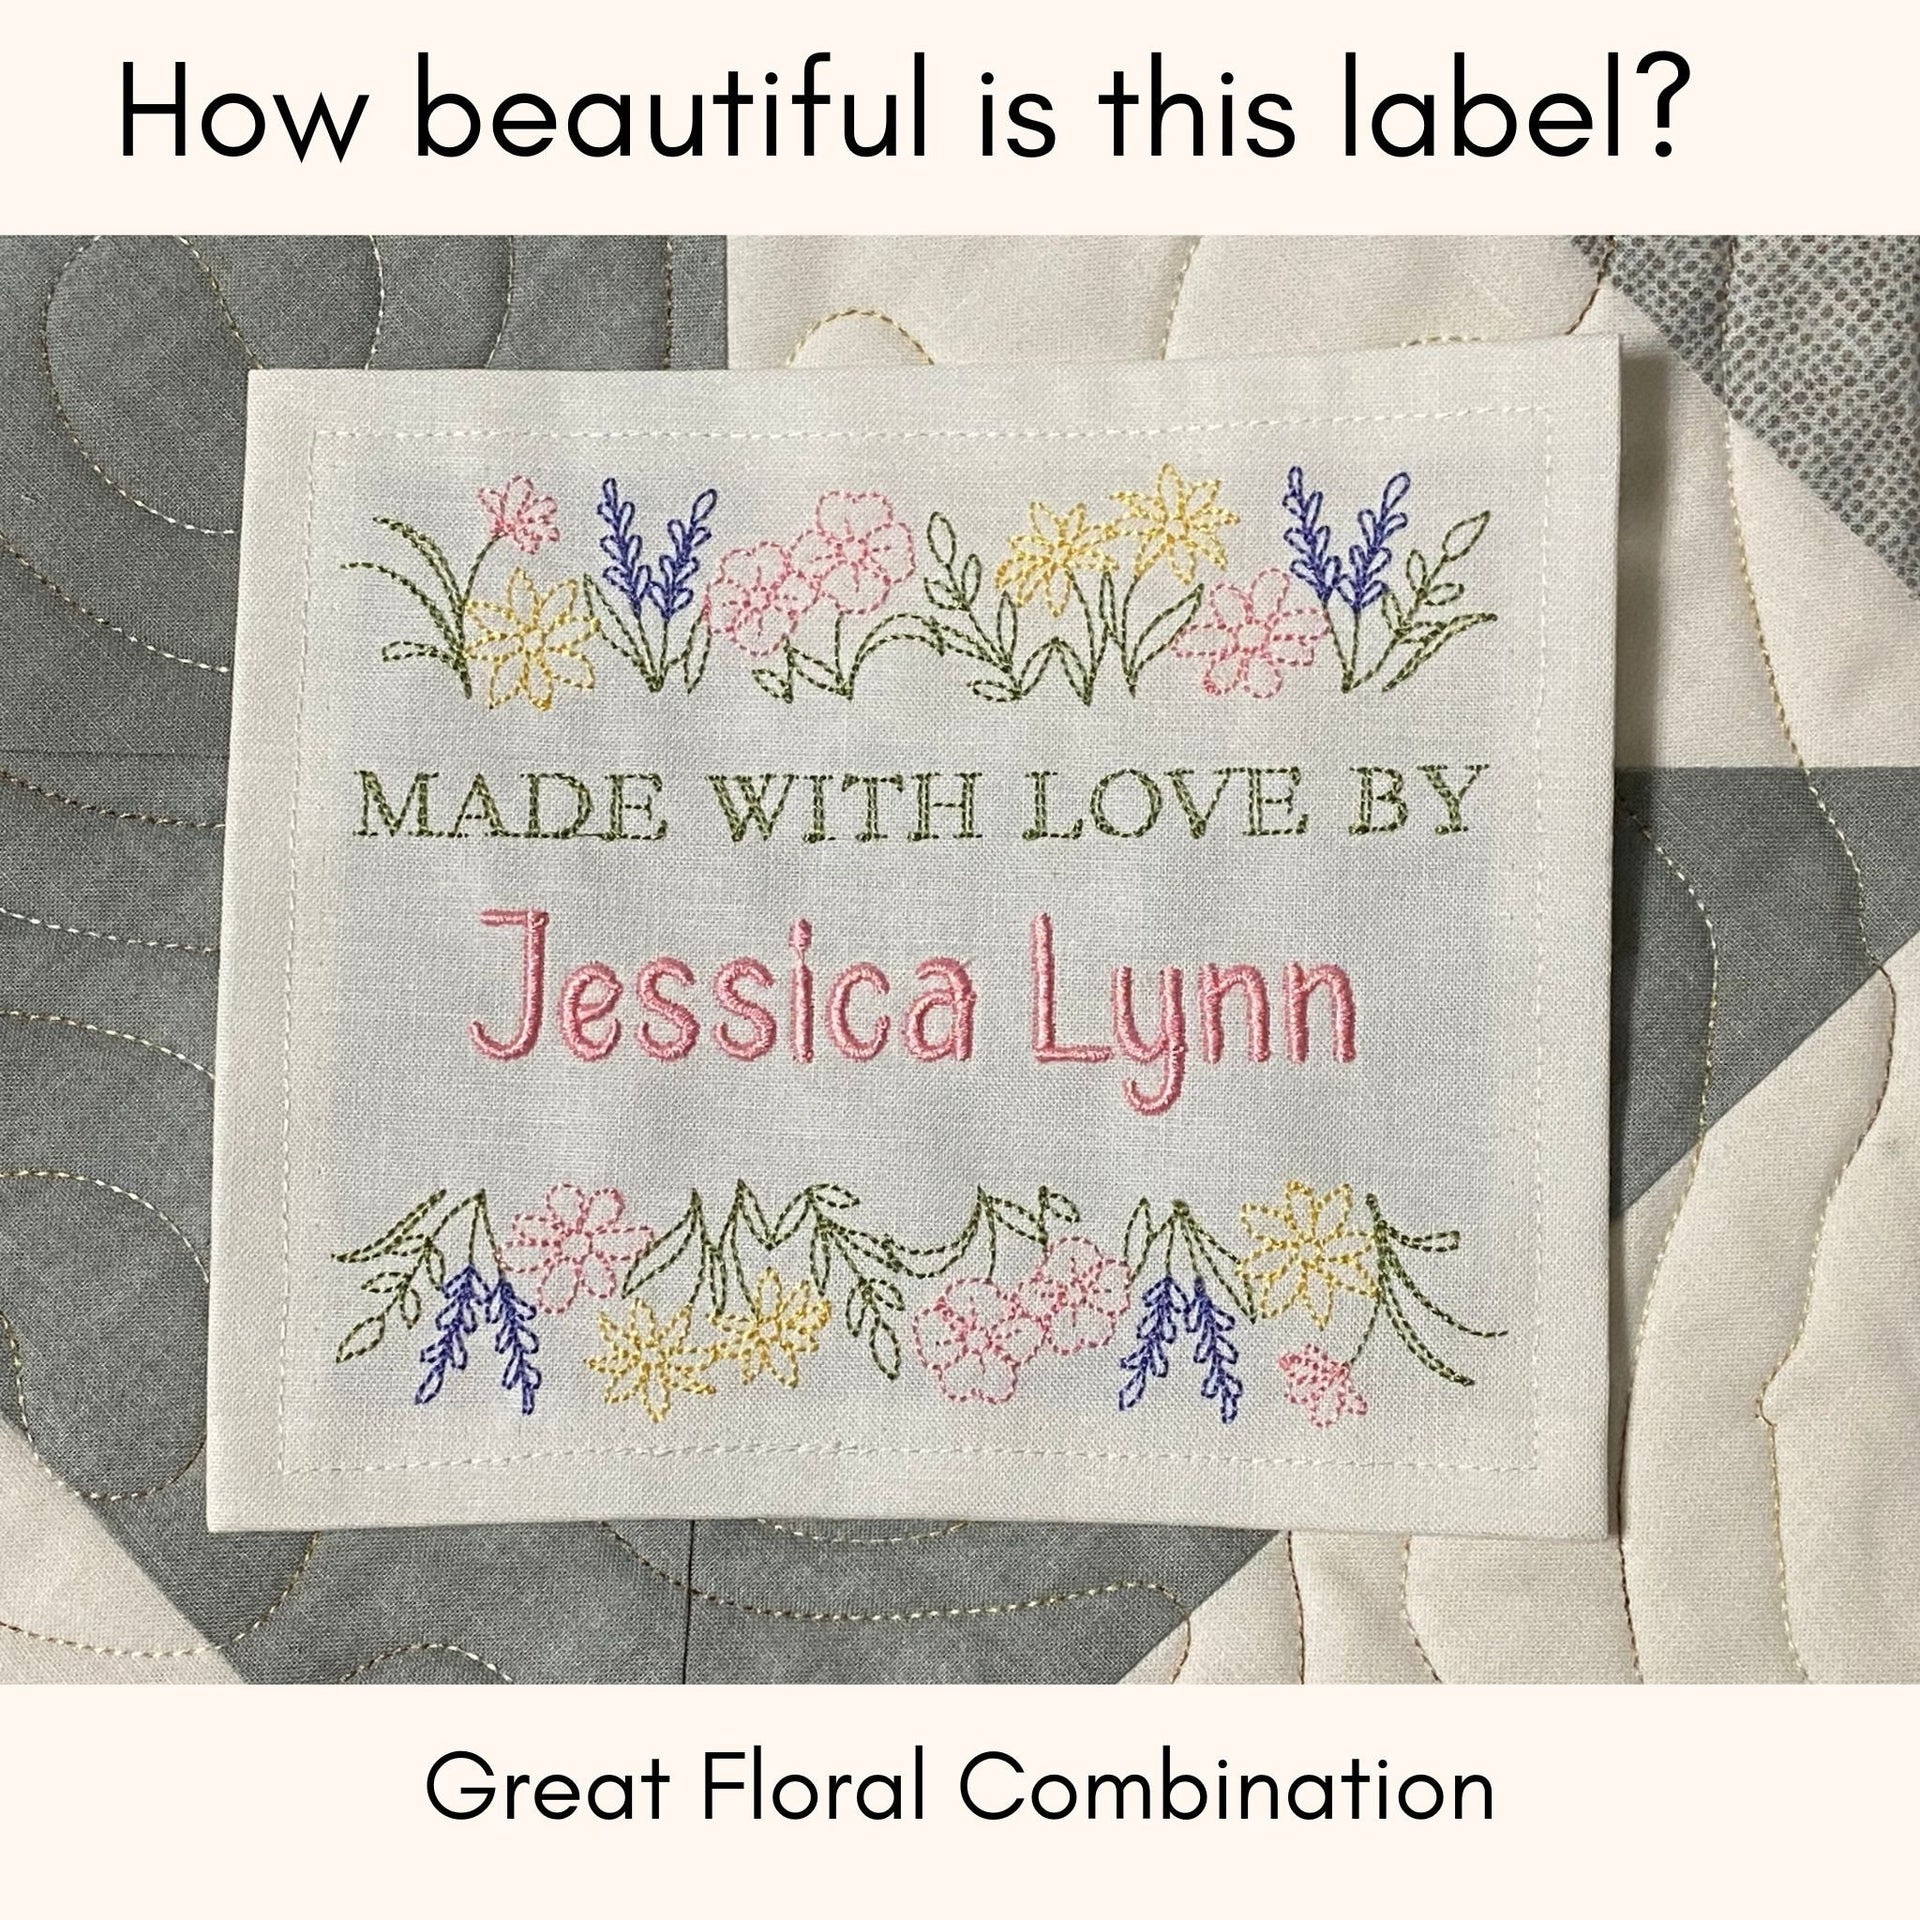  Personalized Quilt Labels - Floral Sheers Quilt Labels